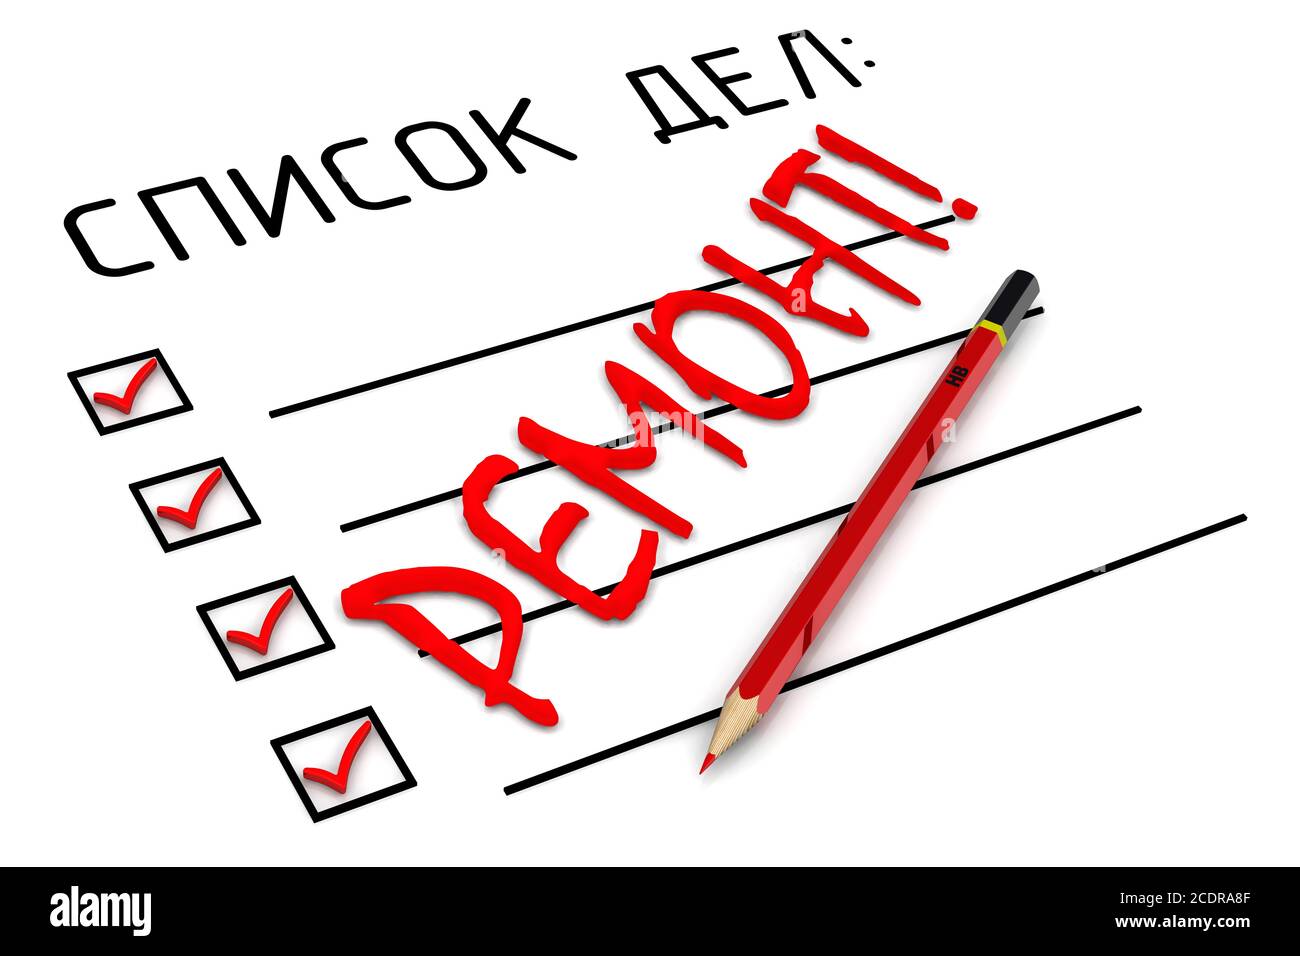 Repairs! The To Do List. Translation text: 'repair'. One red pencil and a big red Russian word REPAIRS! in the To-Do List. 3D illustration Stock Photo